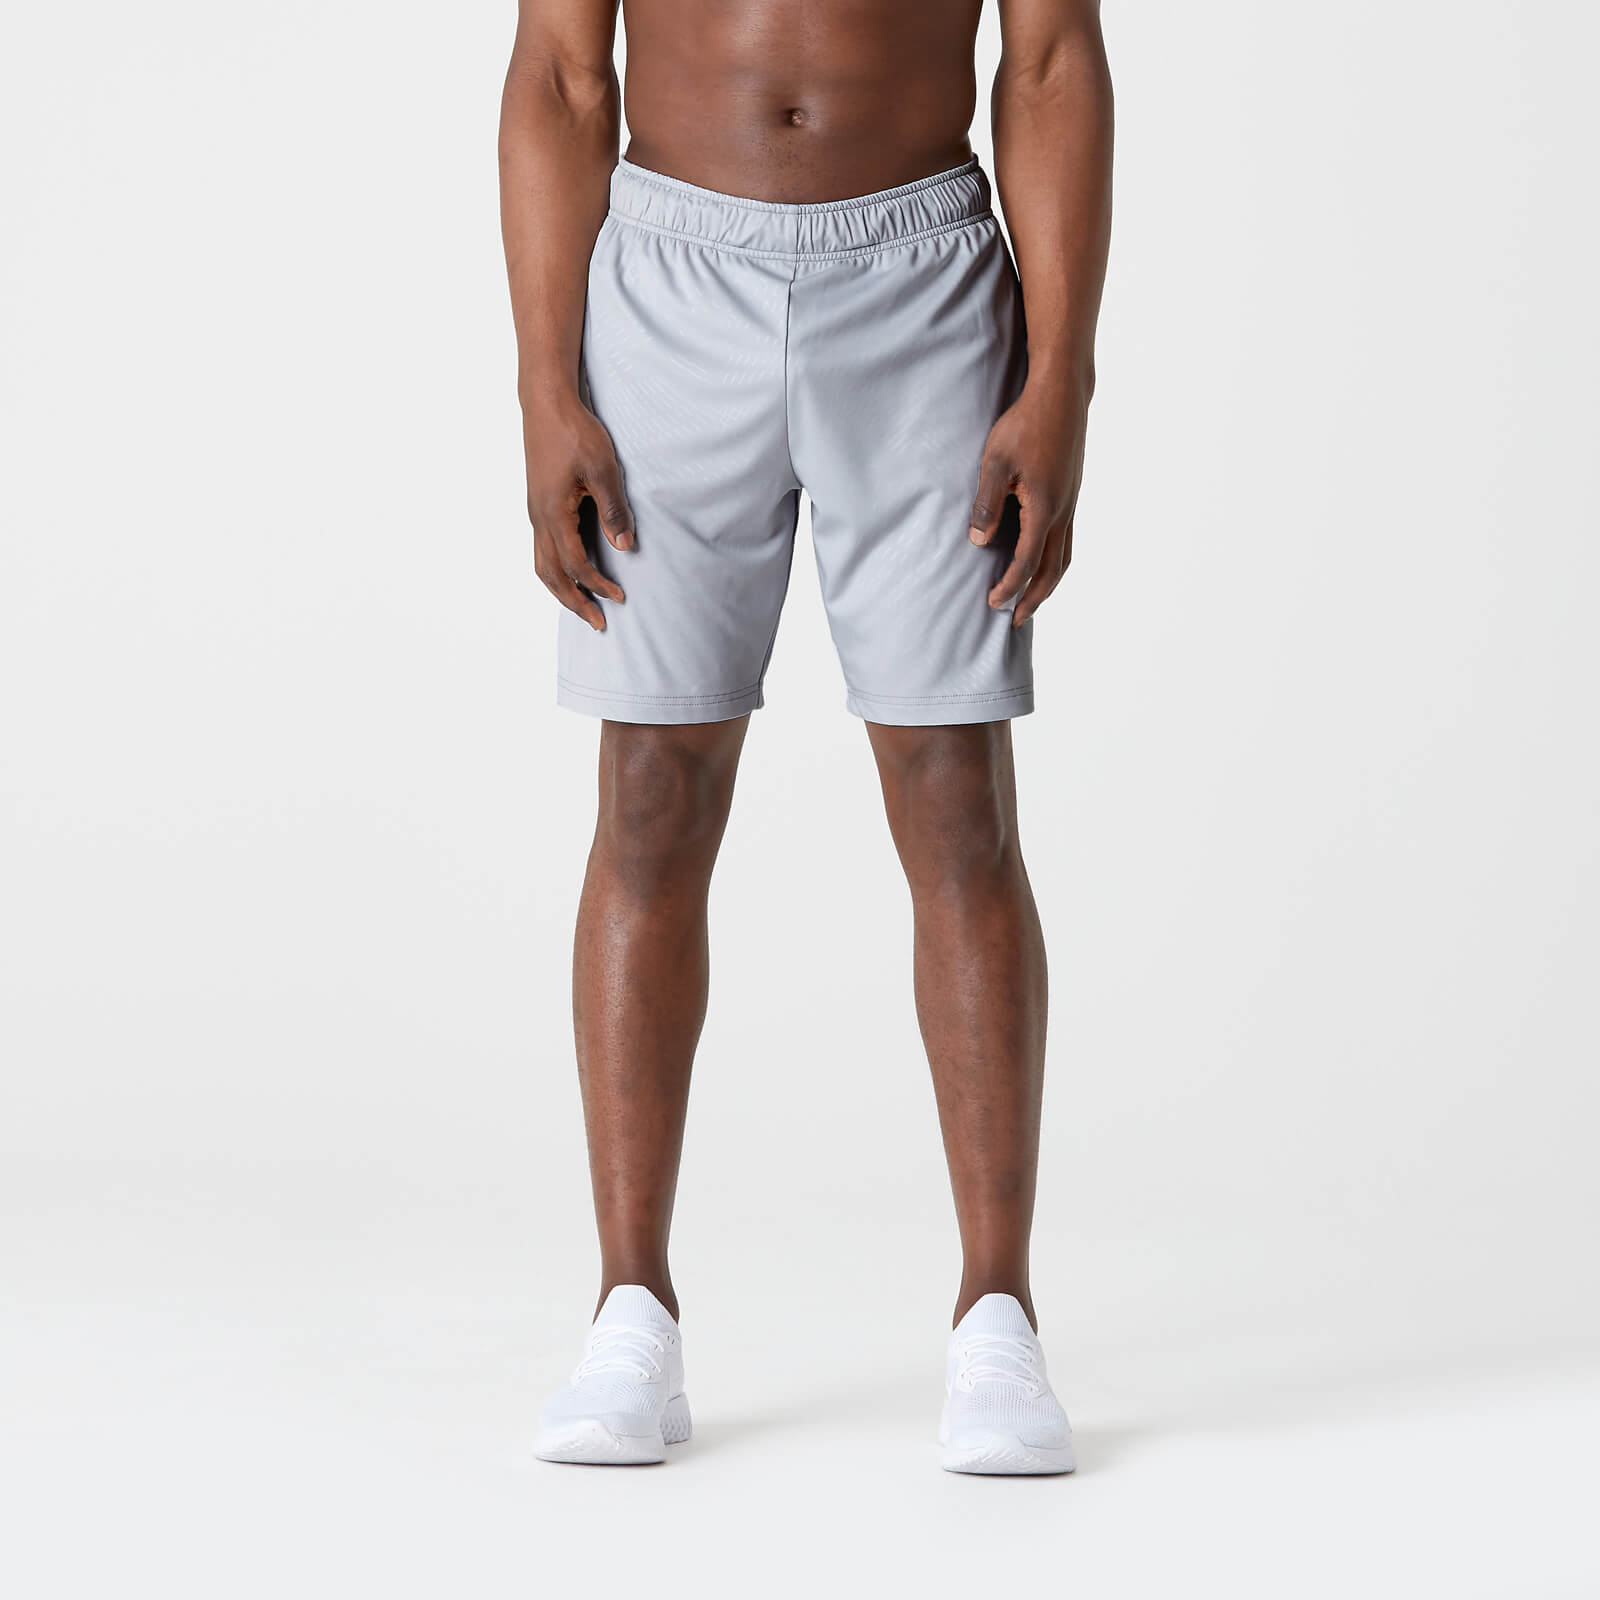 Myprotein Dry-Tech Infinity Shorts - Silver - XS